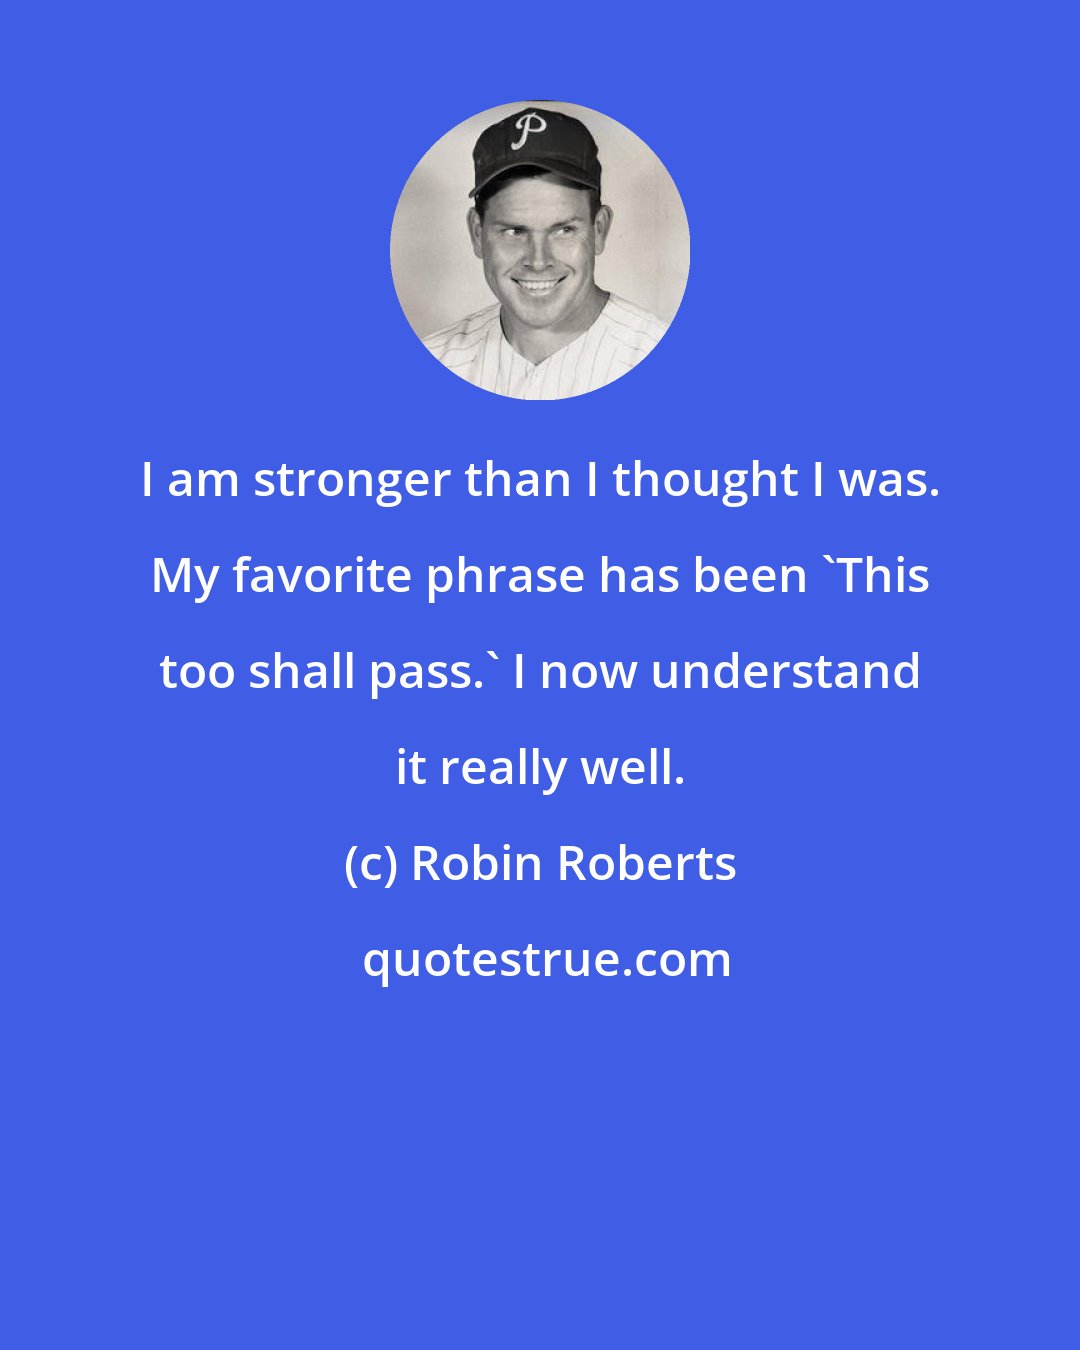 Robin Roberts: I am stronger than I thought I was. My favorite phrase has been 'This too shall pass.' I now understand it really well.